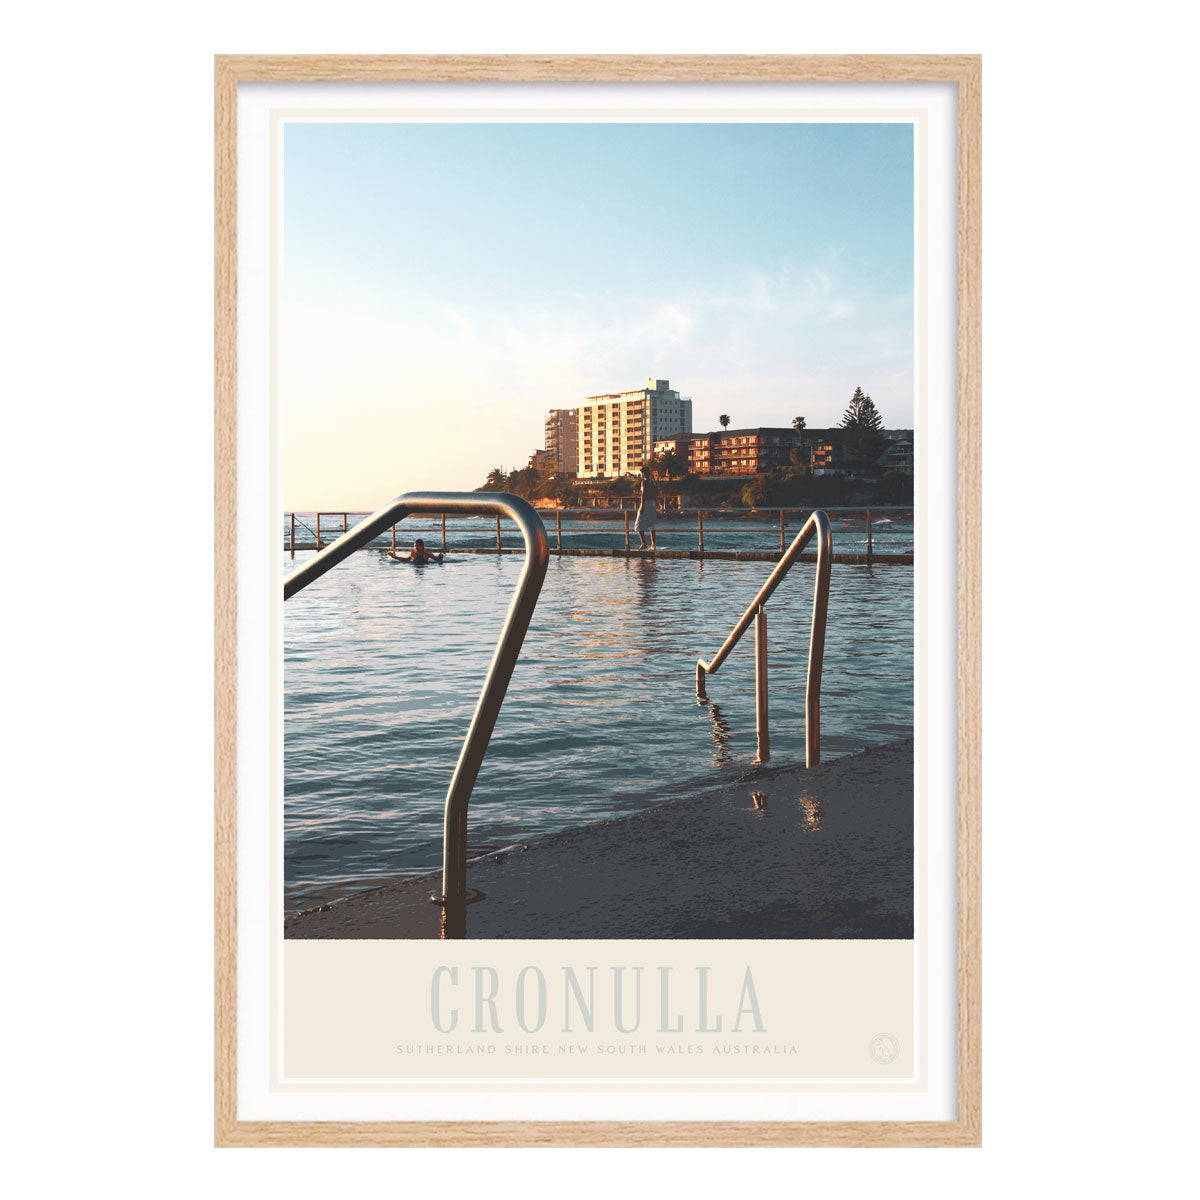 Cronulla Beach Pool vintage retro travel poster print in oak frame by Places We Luv